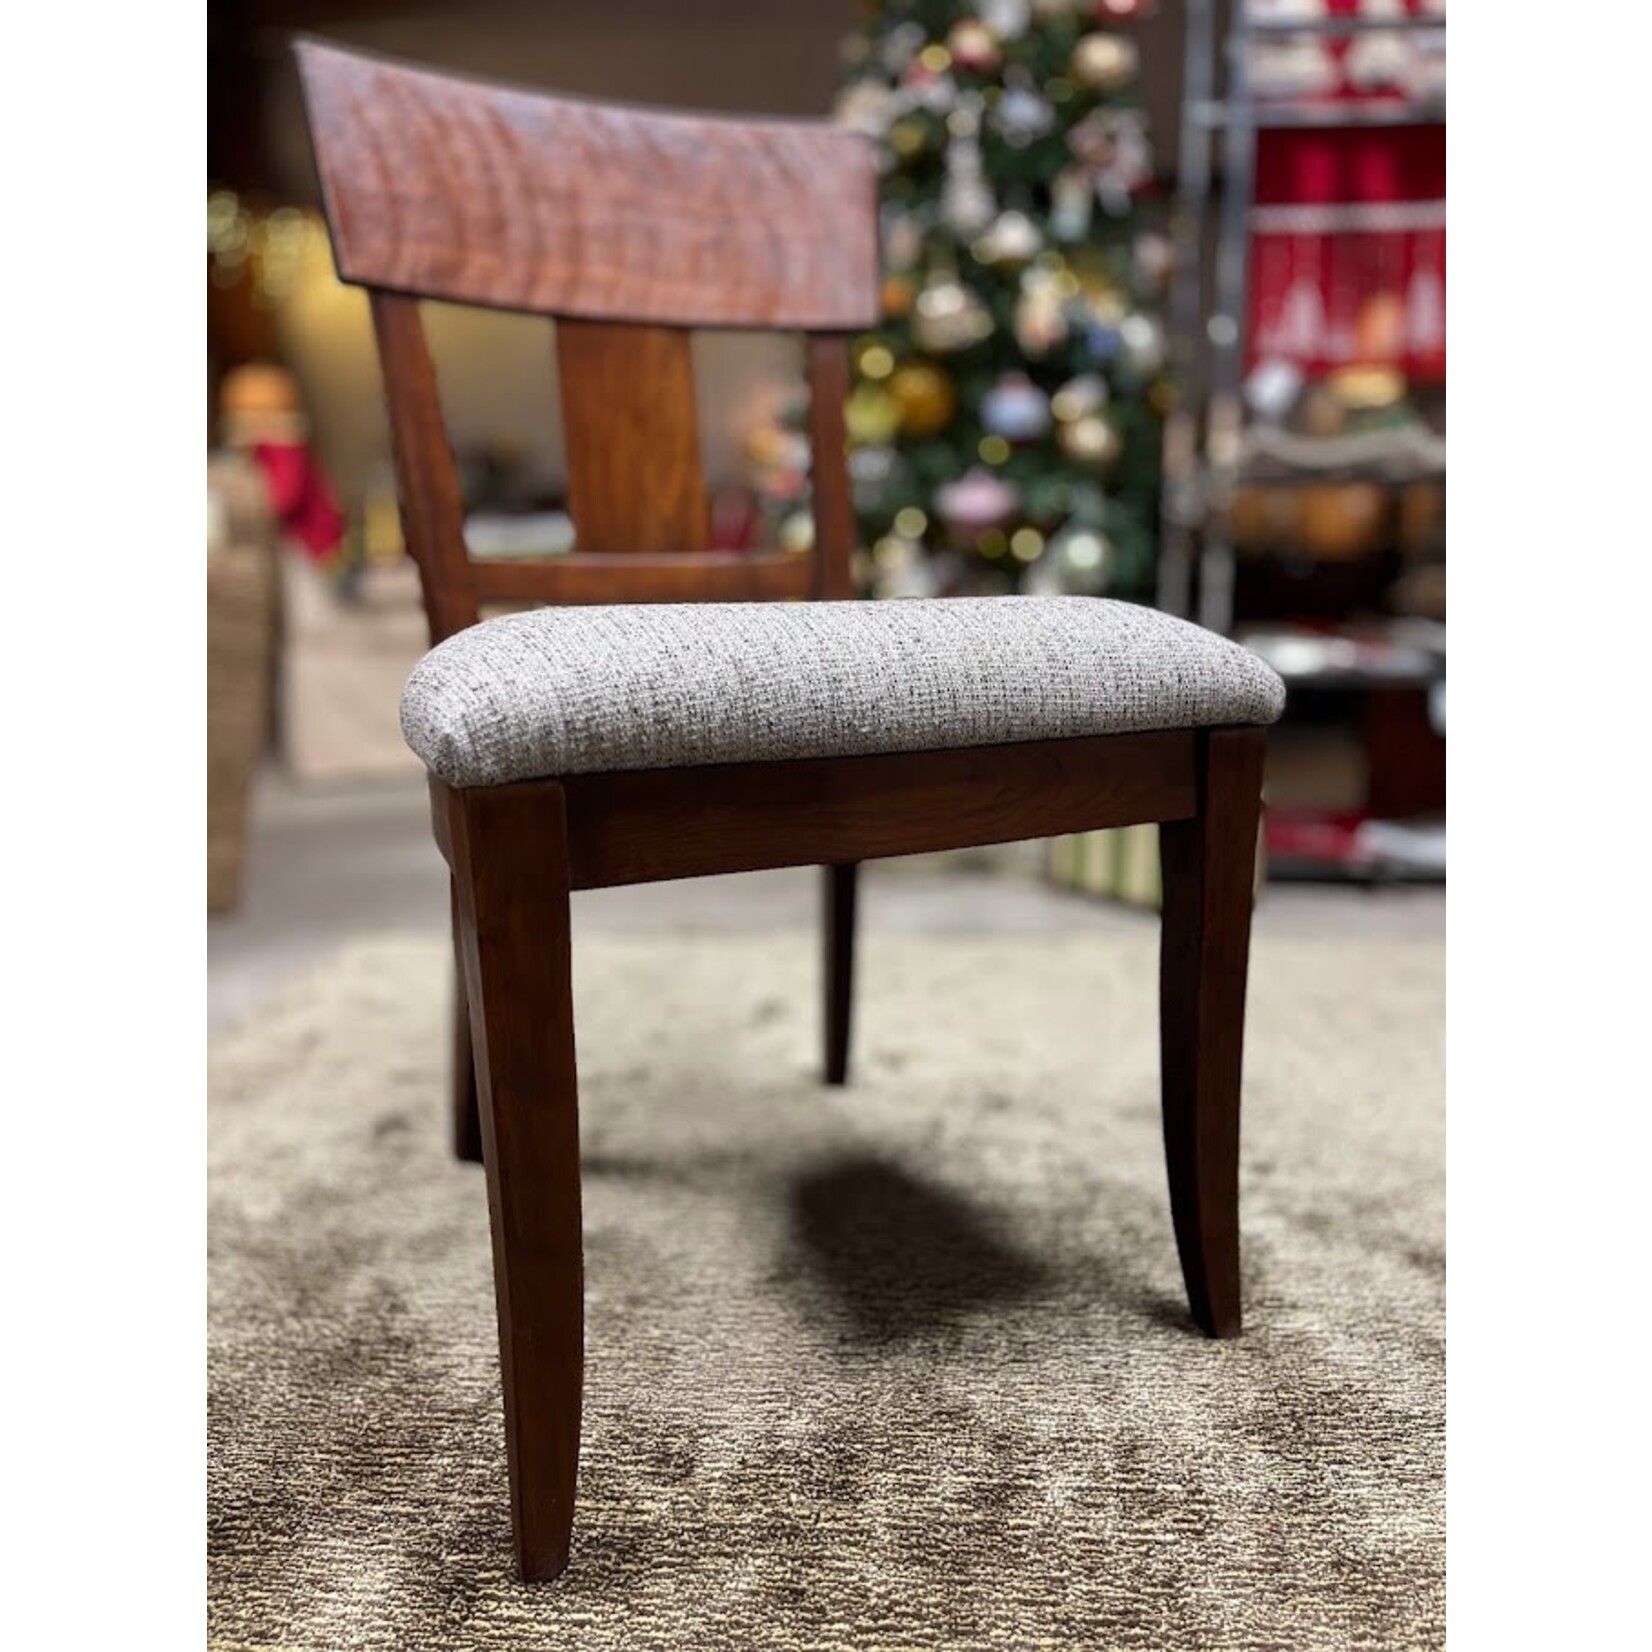 Gat Creek Caperton Thea Side Chair with Fabric Seat